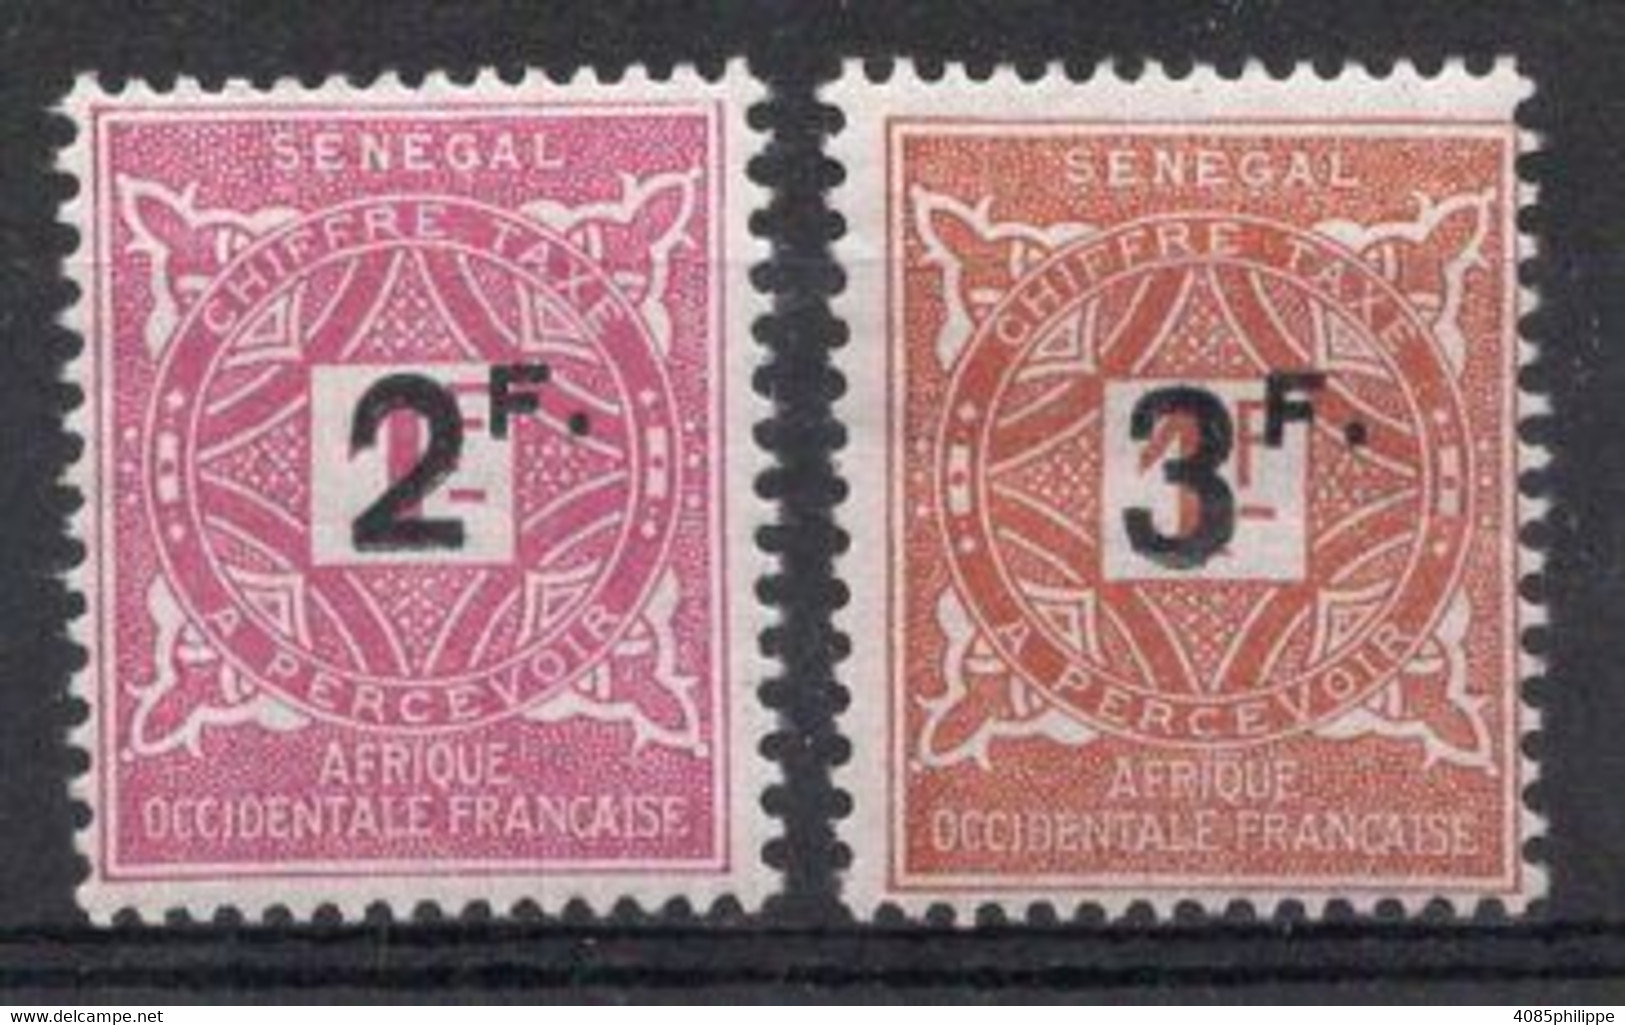 SENEGAL Timbres Taxe  N°20* & N°21* Neufs Charnières TB Cote : 21,00€ - Strafport